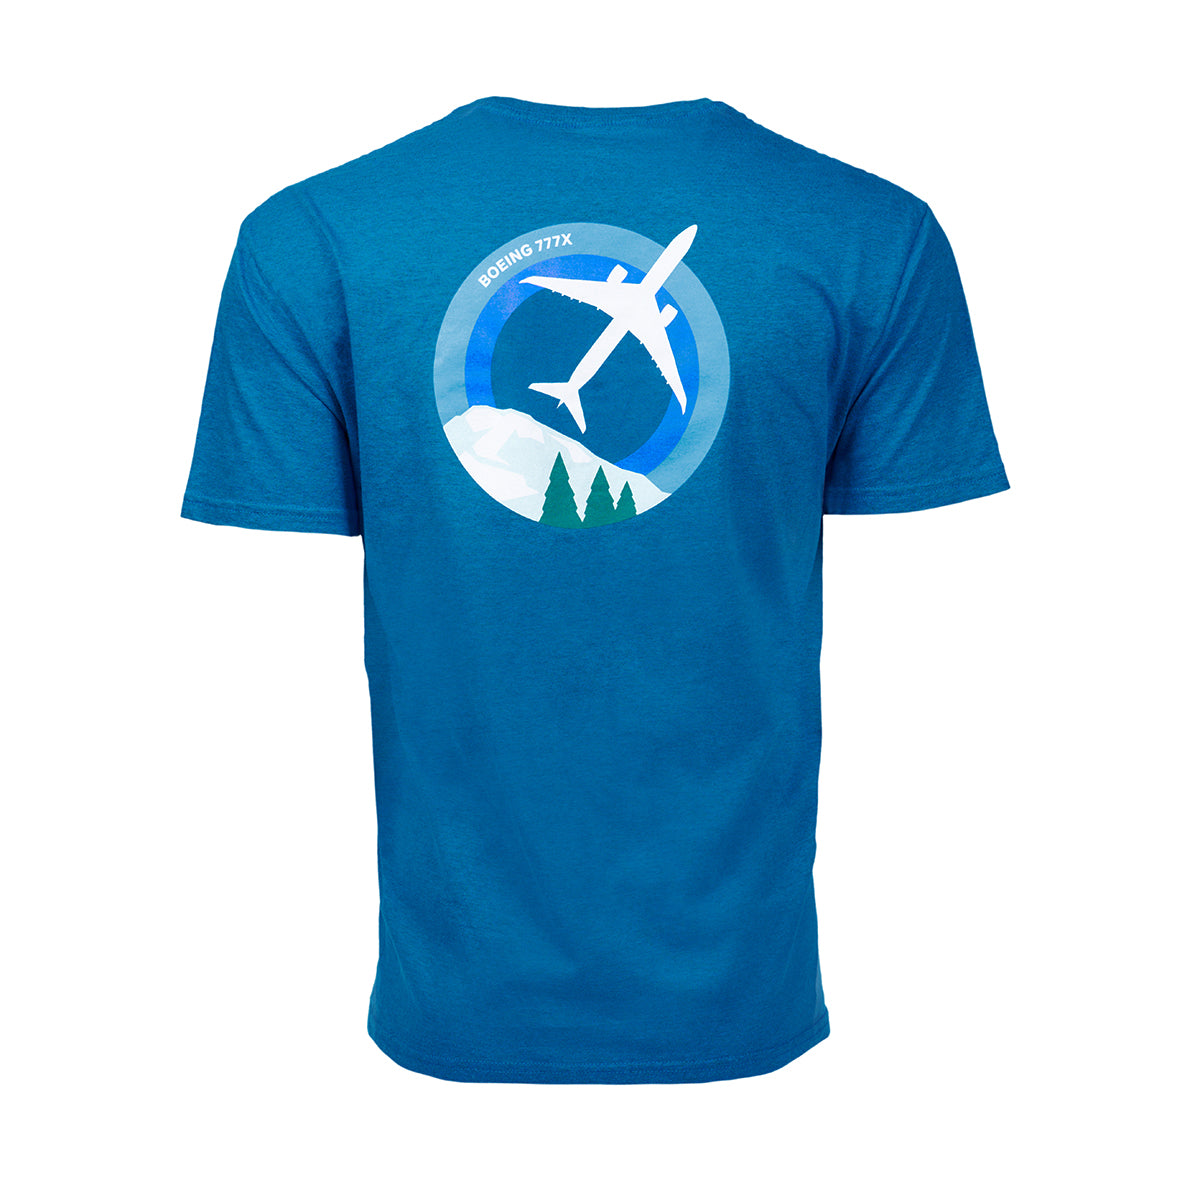 Full product image of the back side of the t-shirt in blue color.  Showing the Skyward graphic of the Boeing 777X.